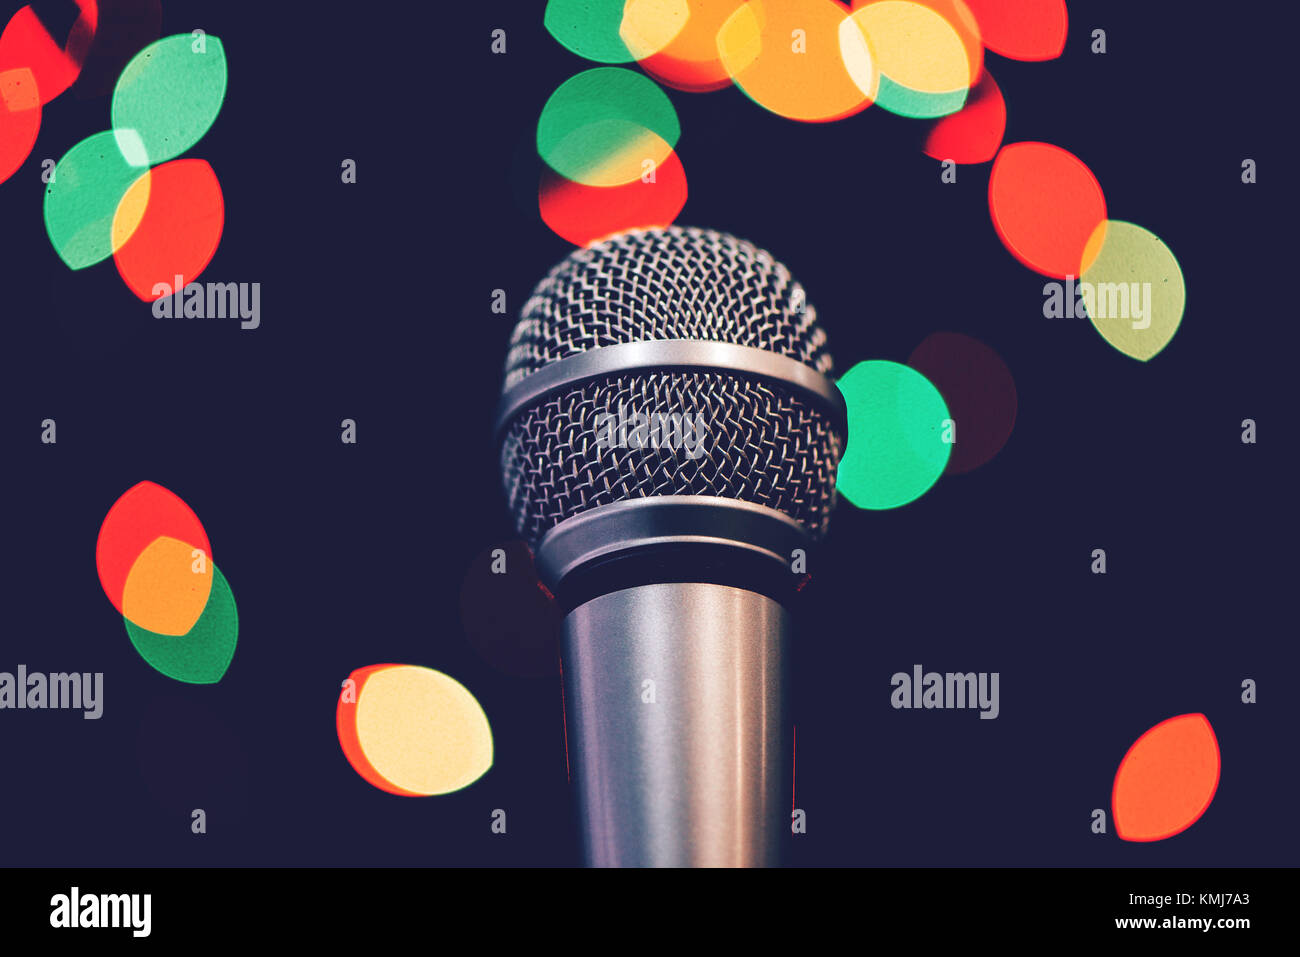 Audio microphone on stage with bokeh light. Music concert or talent show concept with copy space. Stock Photo